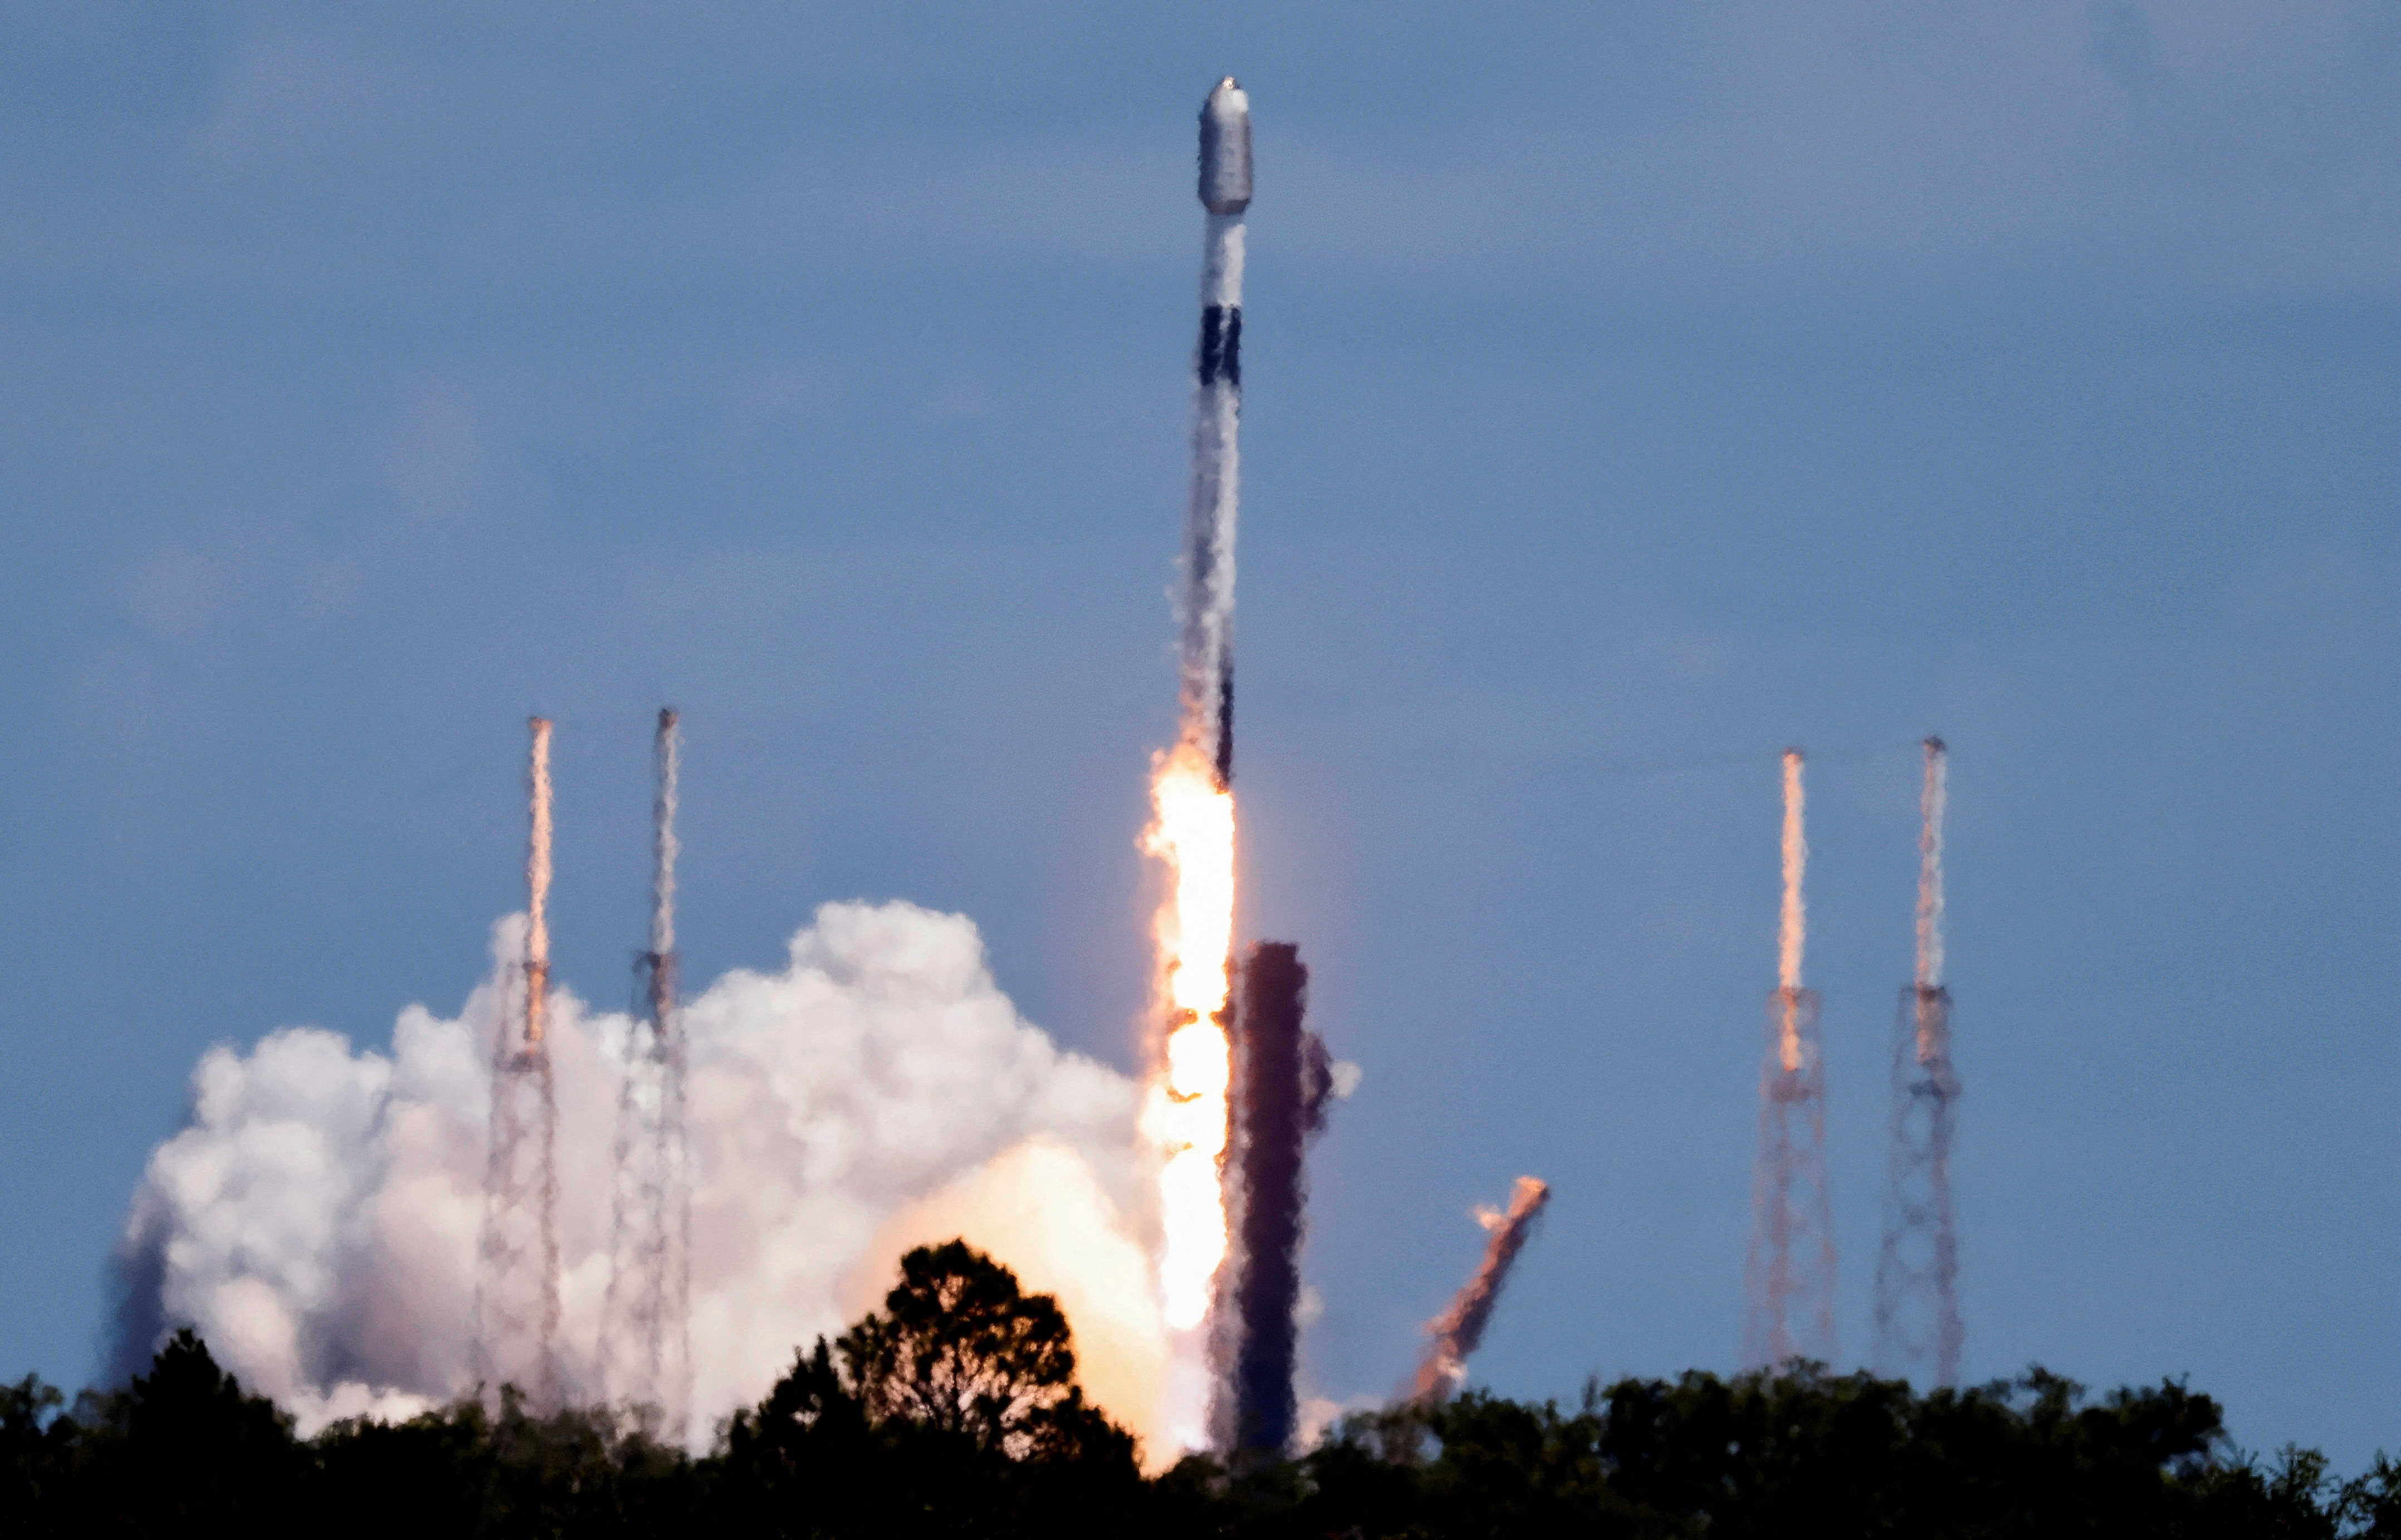 A SpaceX Falcon 9 rocket is launched, carrying 23 Starlink satellites into low Earth orbit